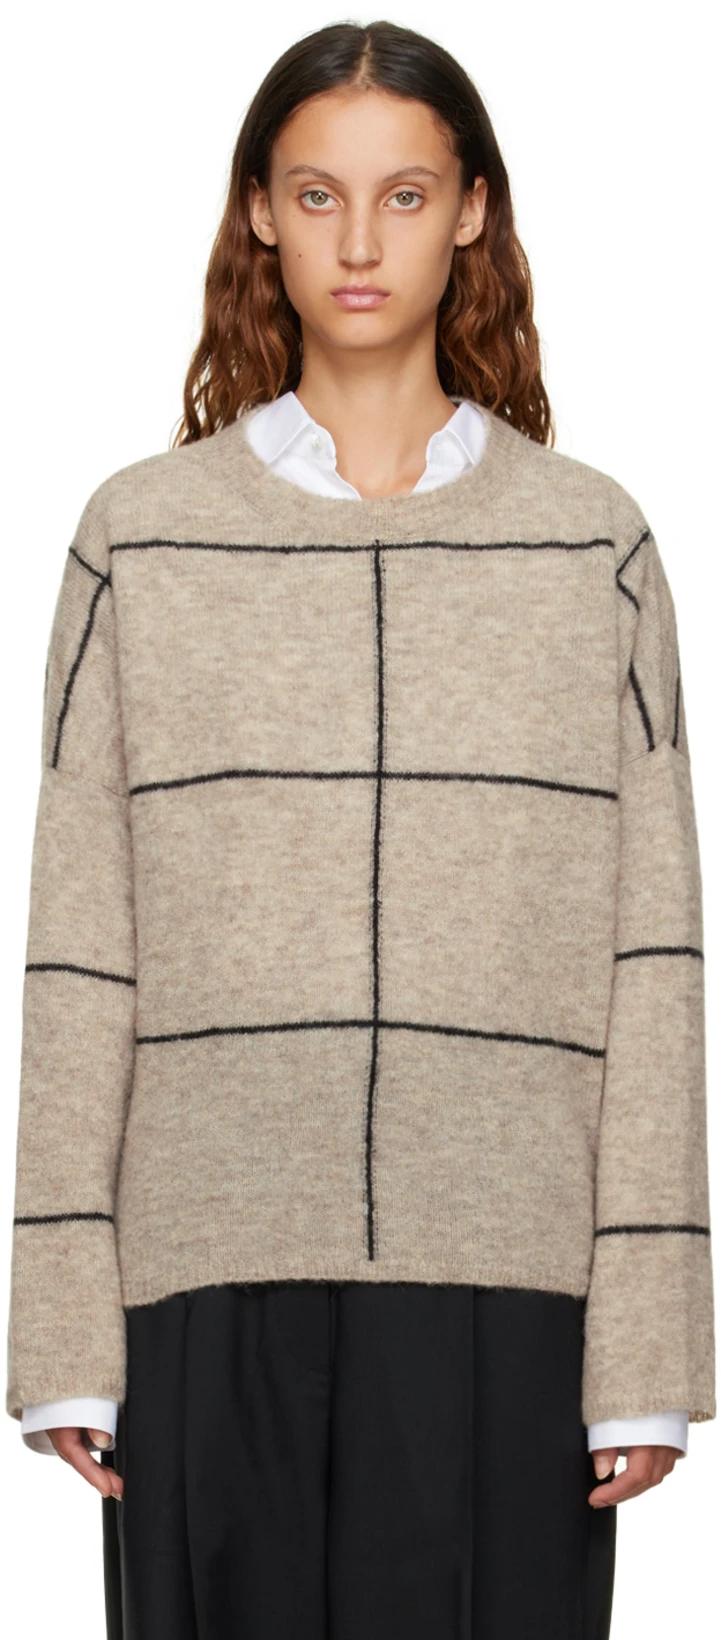 Taupe Plaid Sweater by CORDERA